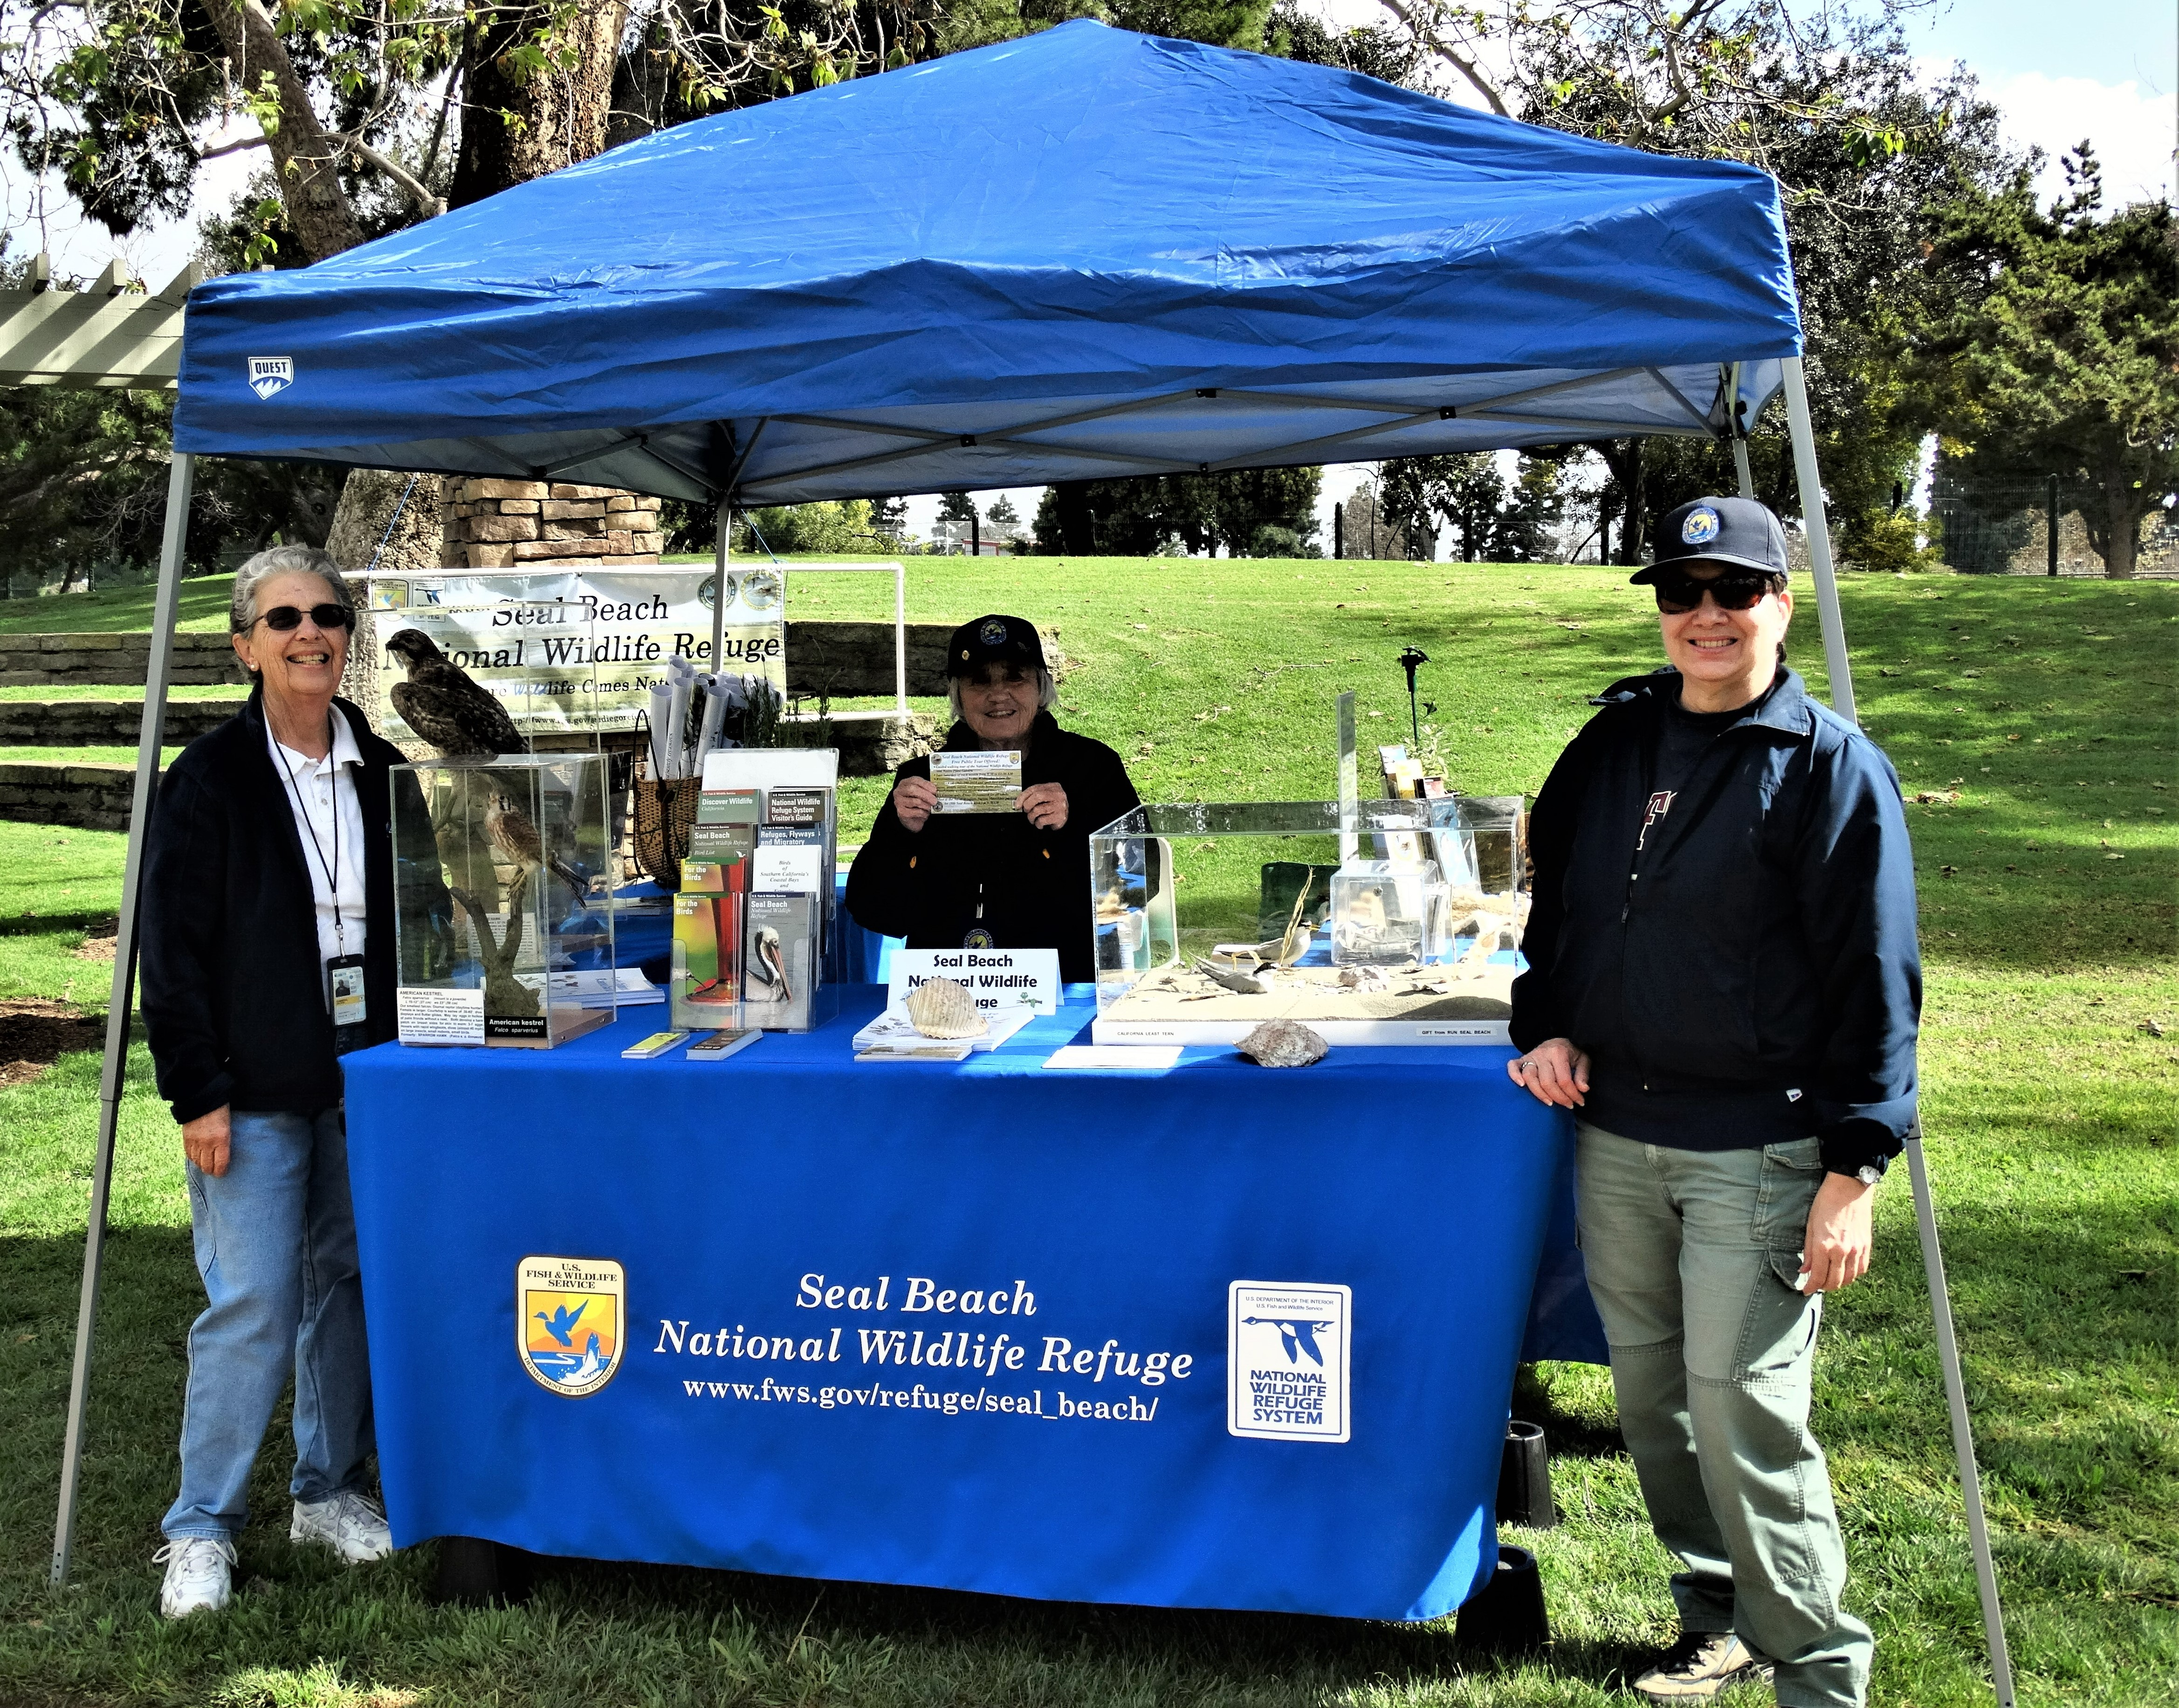 Three women stand at a blue-tented booth ready to engage visitors. The blue bunting on the booth has the words "Seal Beach National Wildlife Refuge" on it.